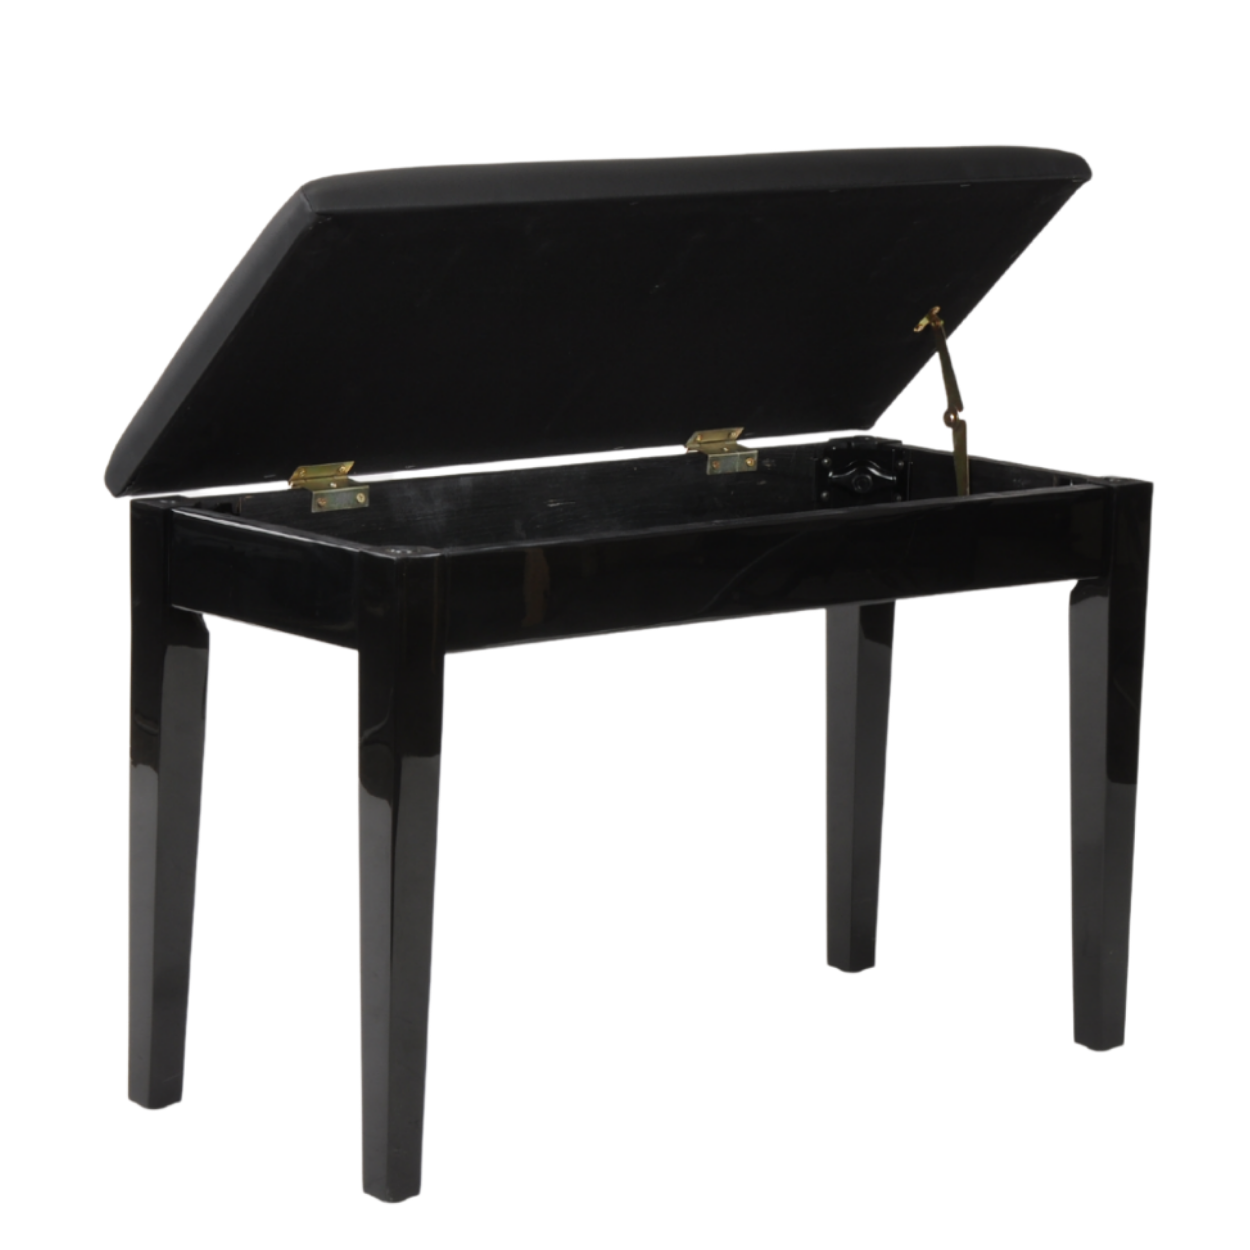 NEOWOOD Q111 DOUBLE SEATED PIANO BENCH/PIANO STOOL, NEOWOOD, KEYBOARD & PIANO ACCESSORIES, neowood-stand-neo-q111, ZOSO MUSIC SDN BHD